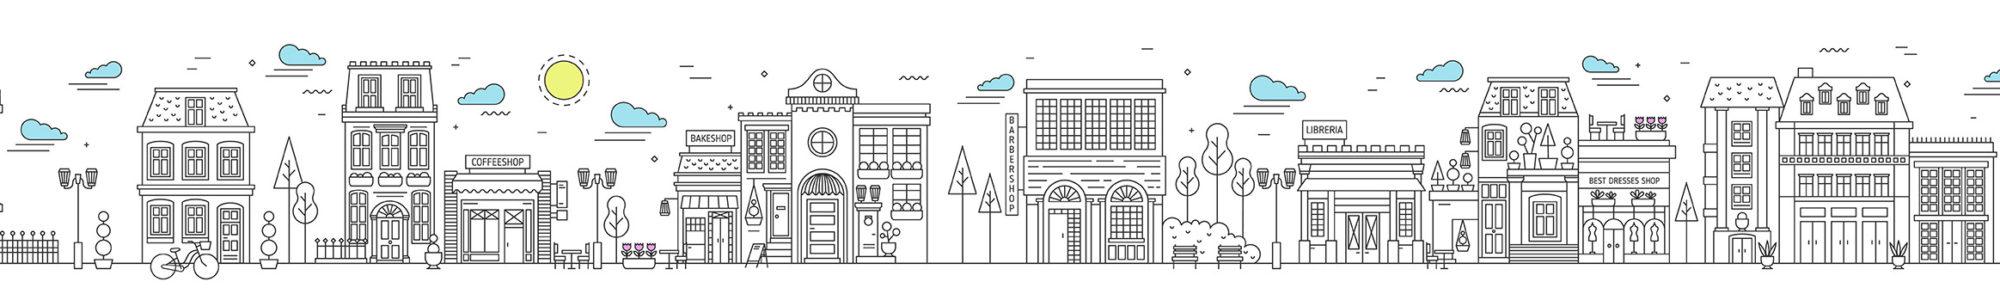 Monochrome seamless urban landscape with city street or district. Cityscape with residential houses and shops drawn with contour lines on white background. Vector illustration in lineart style.